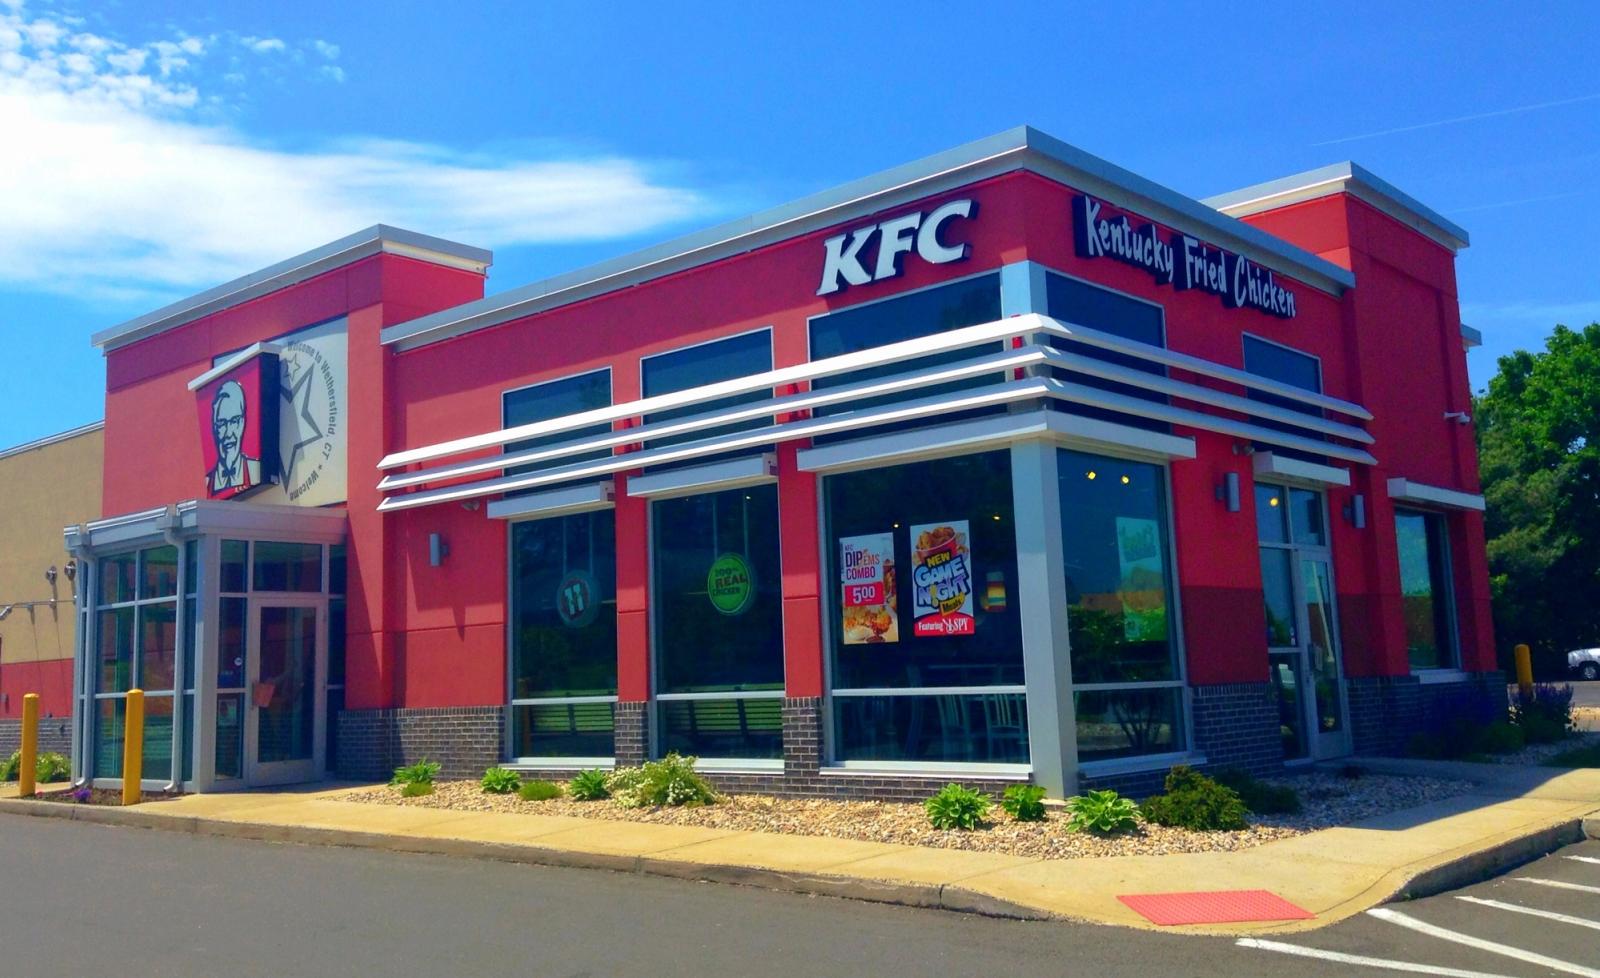 A KFC restaurant in Wethersfield, Connecticut